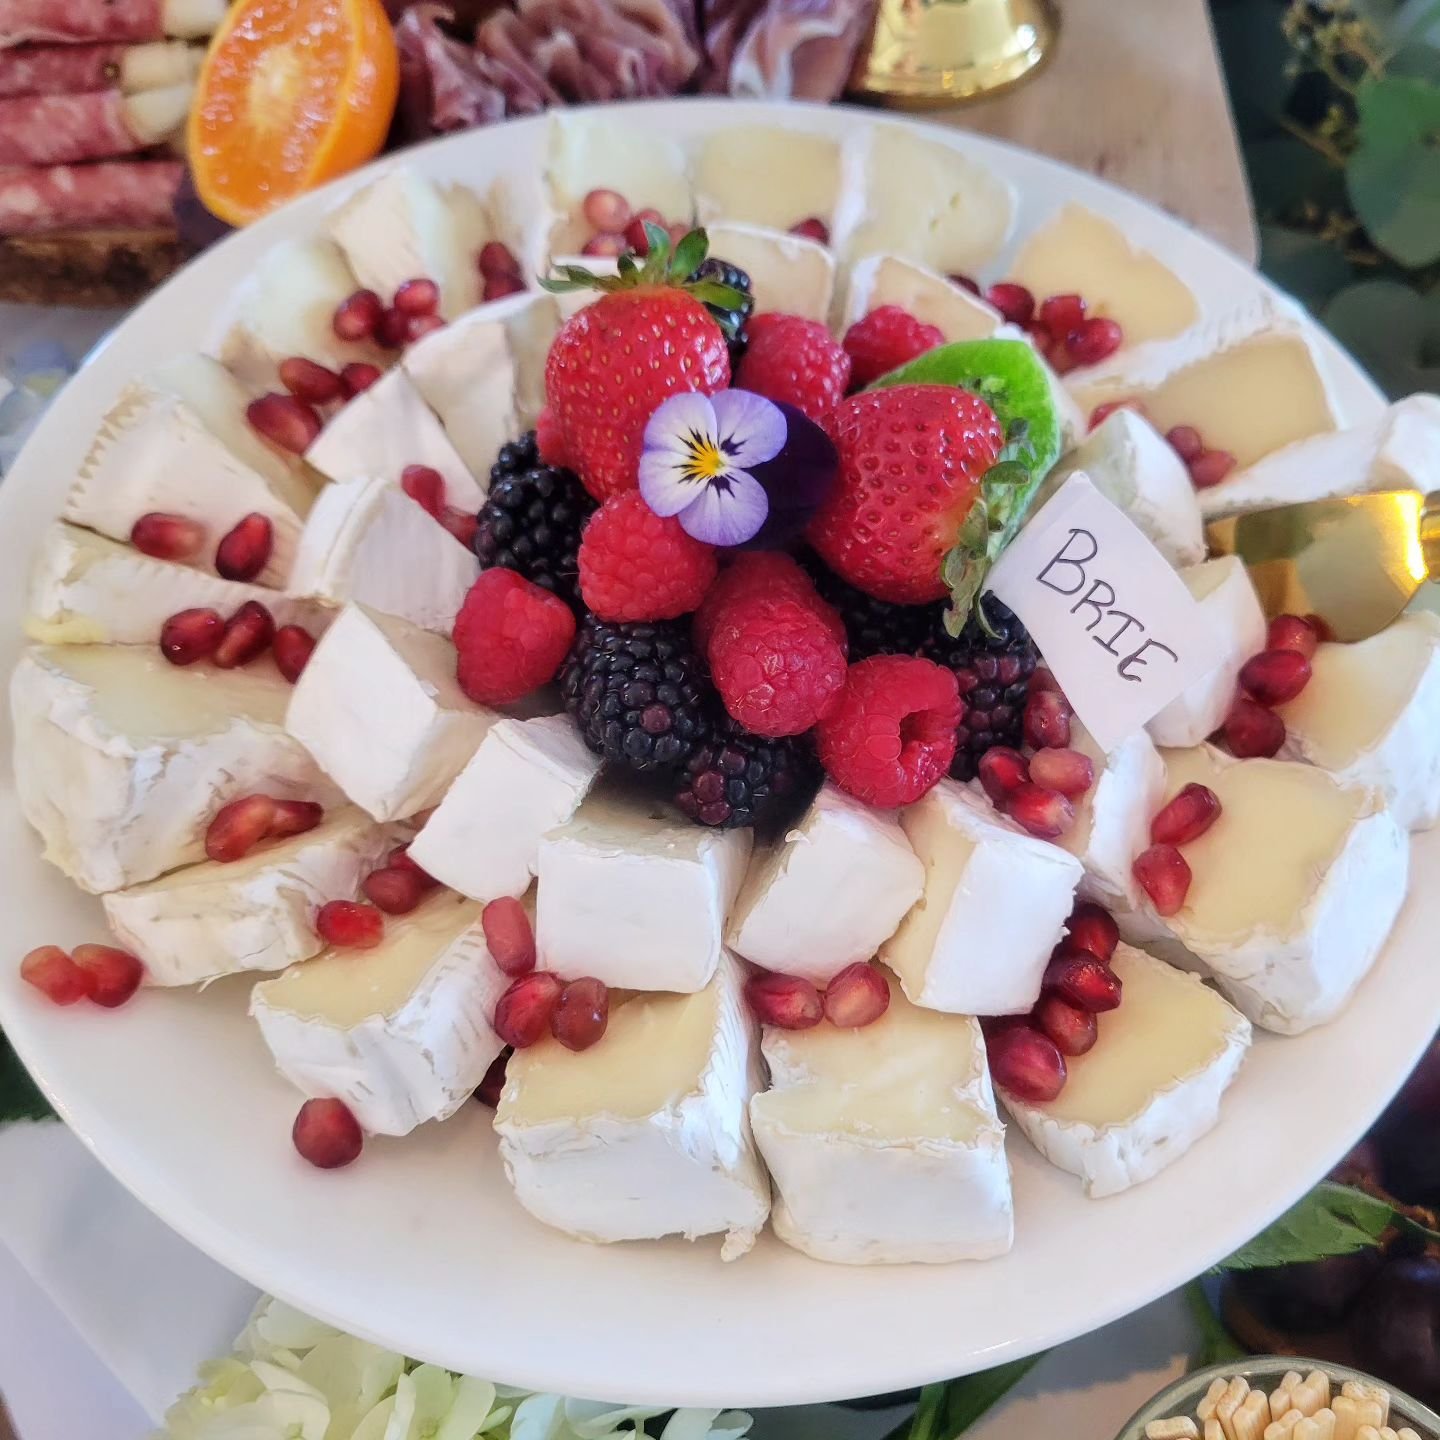 Hello My Name is...

#brie #gatheringfeast #grazing #grazingable #cheeseboard #cheeseboard #charcuterieboard #charcuterie #catered #catering #womanownedbusiness #smallbusiness #foodstyling #foodstagram #cheese #presidentbrie #fruit #strawberry #raspb